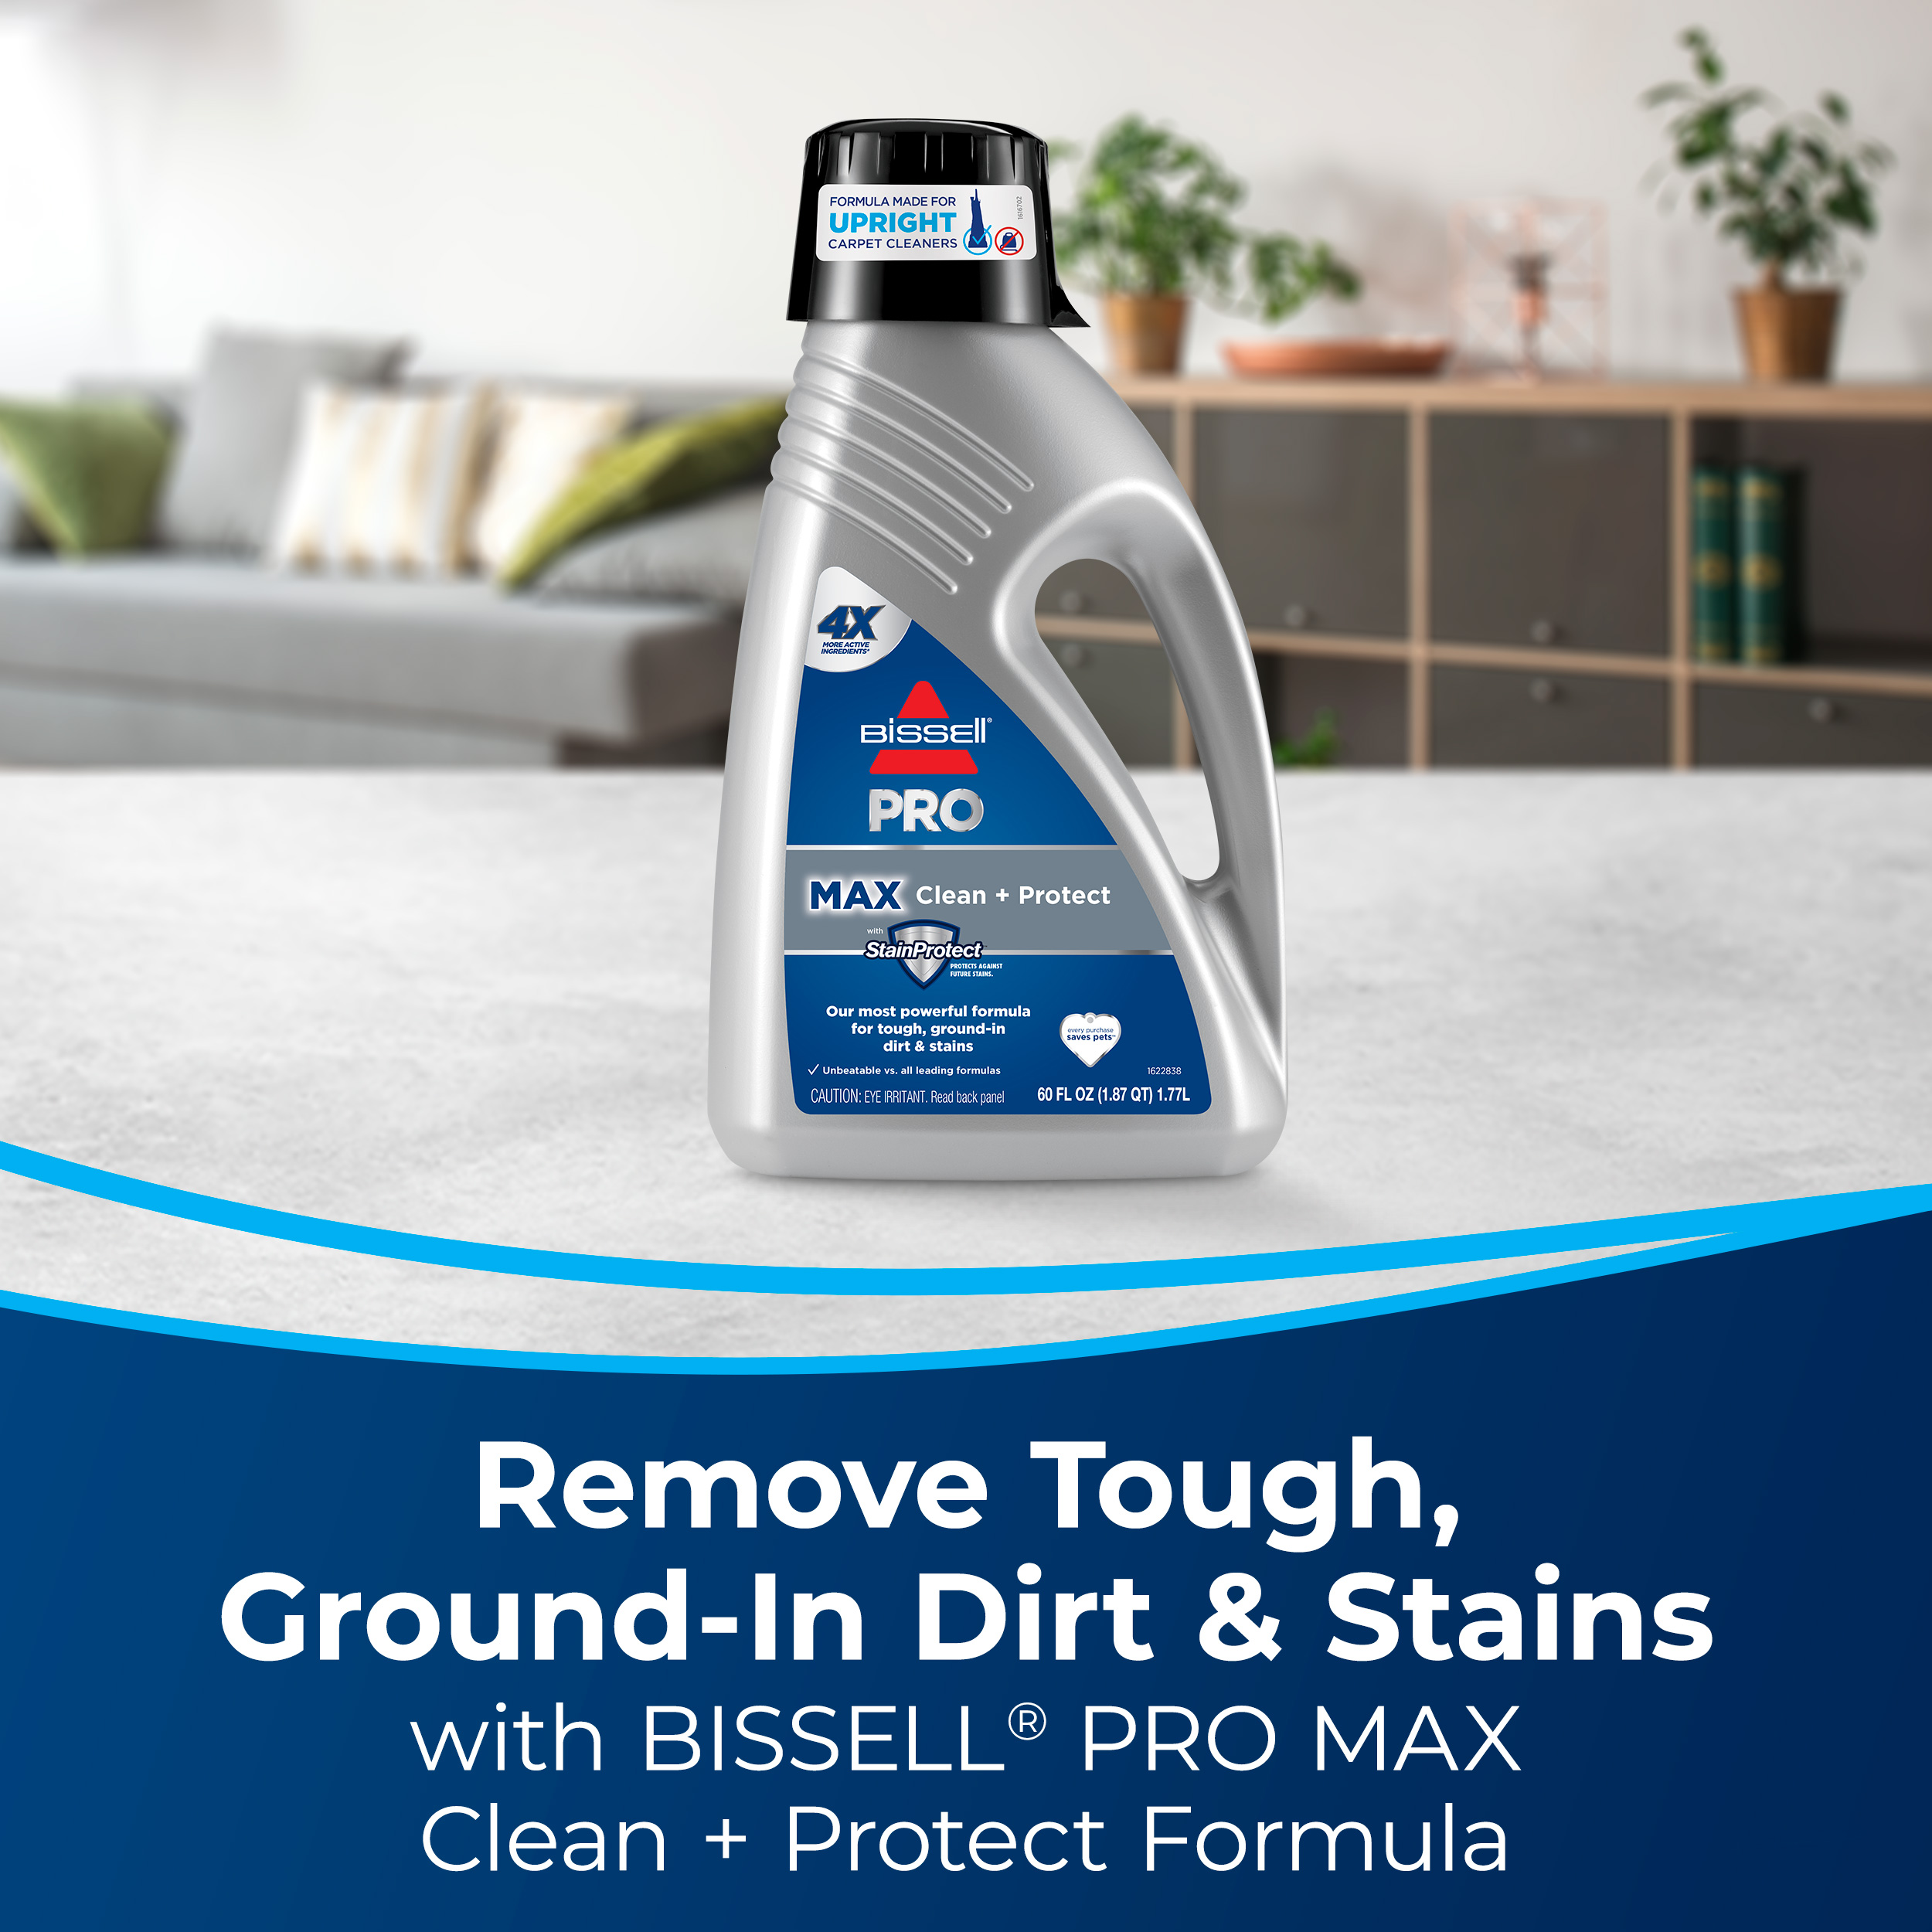 BISSELL Big Green Machine Professional Carpet Cleaner, 86T3 - image 7 of 20